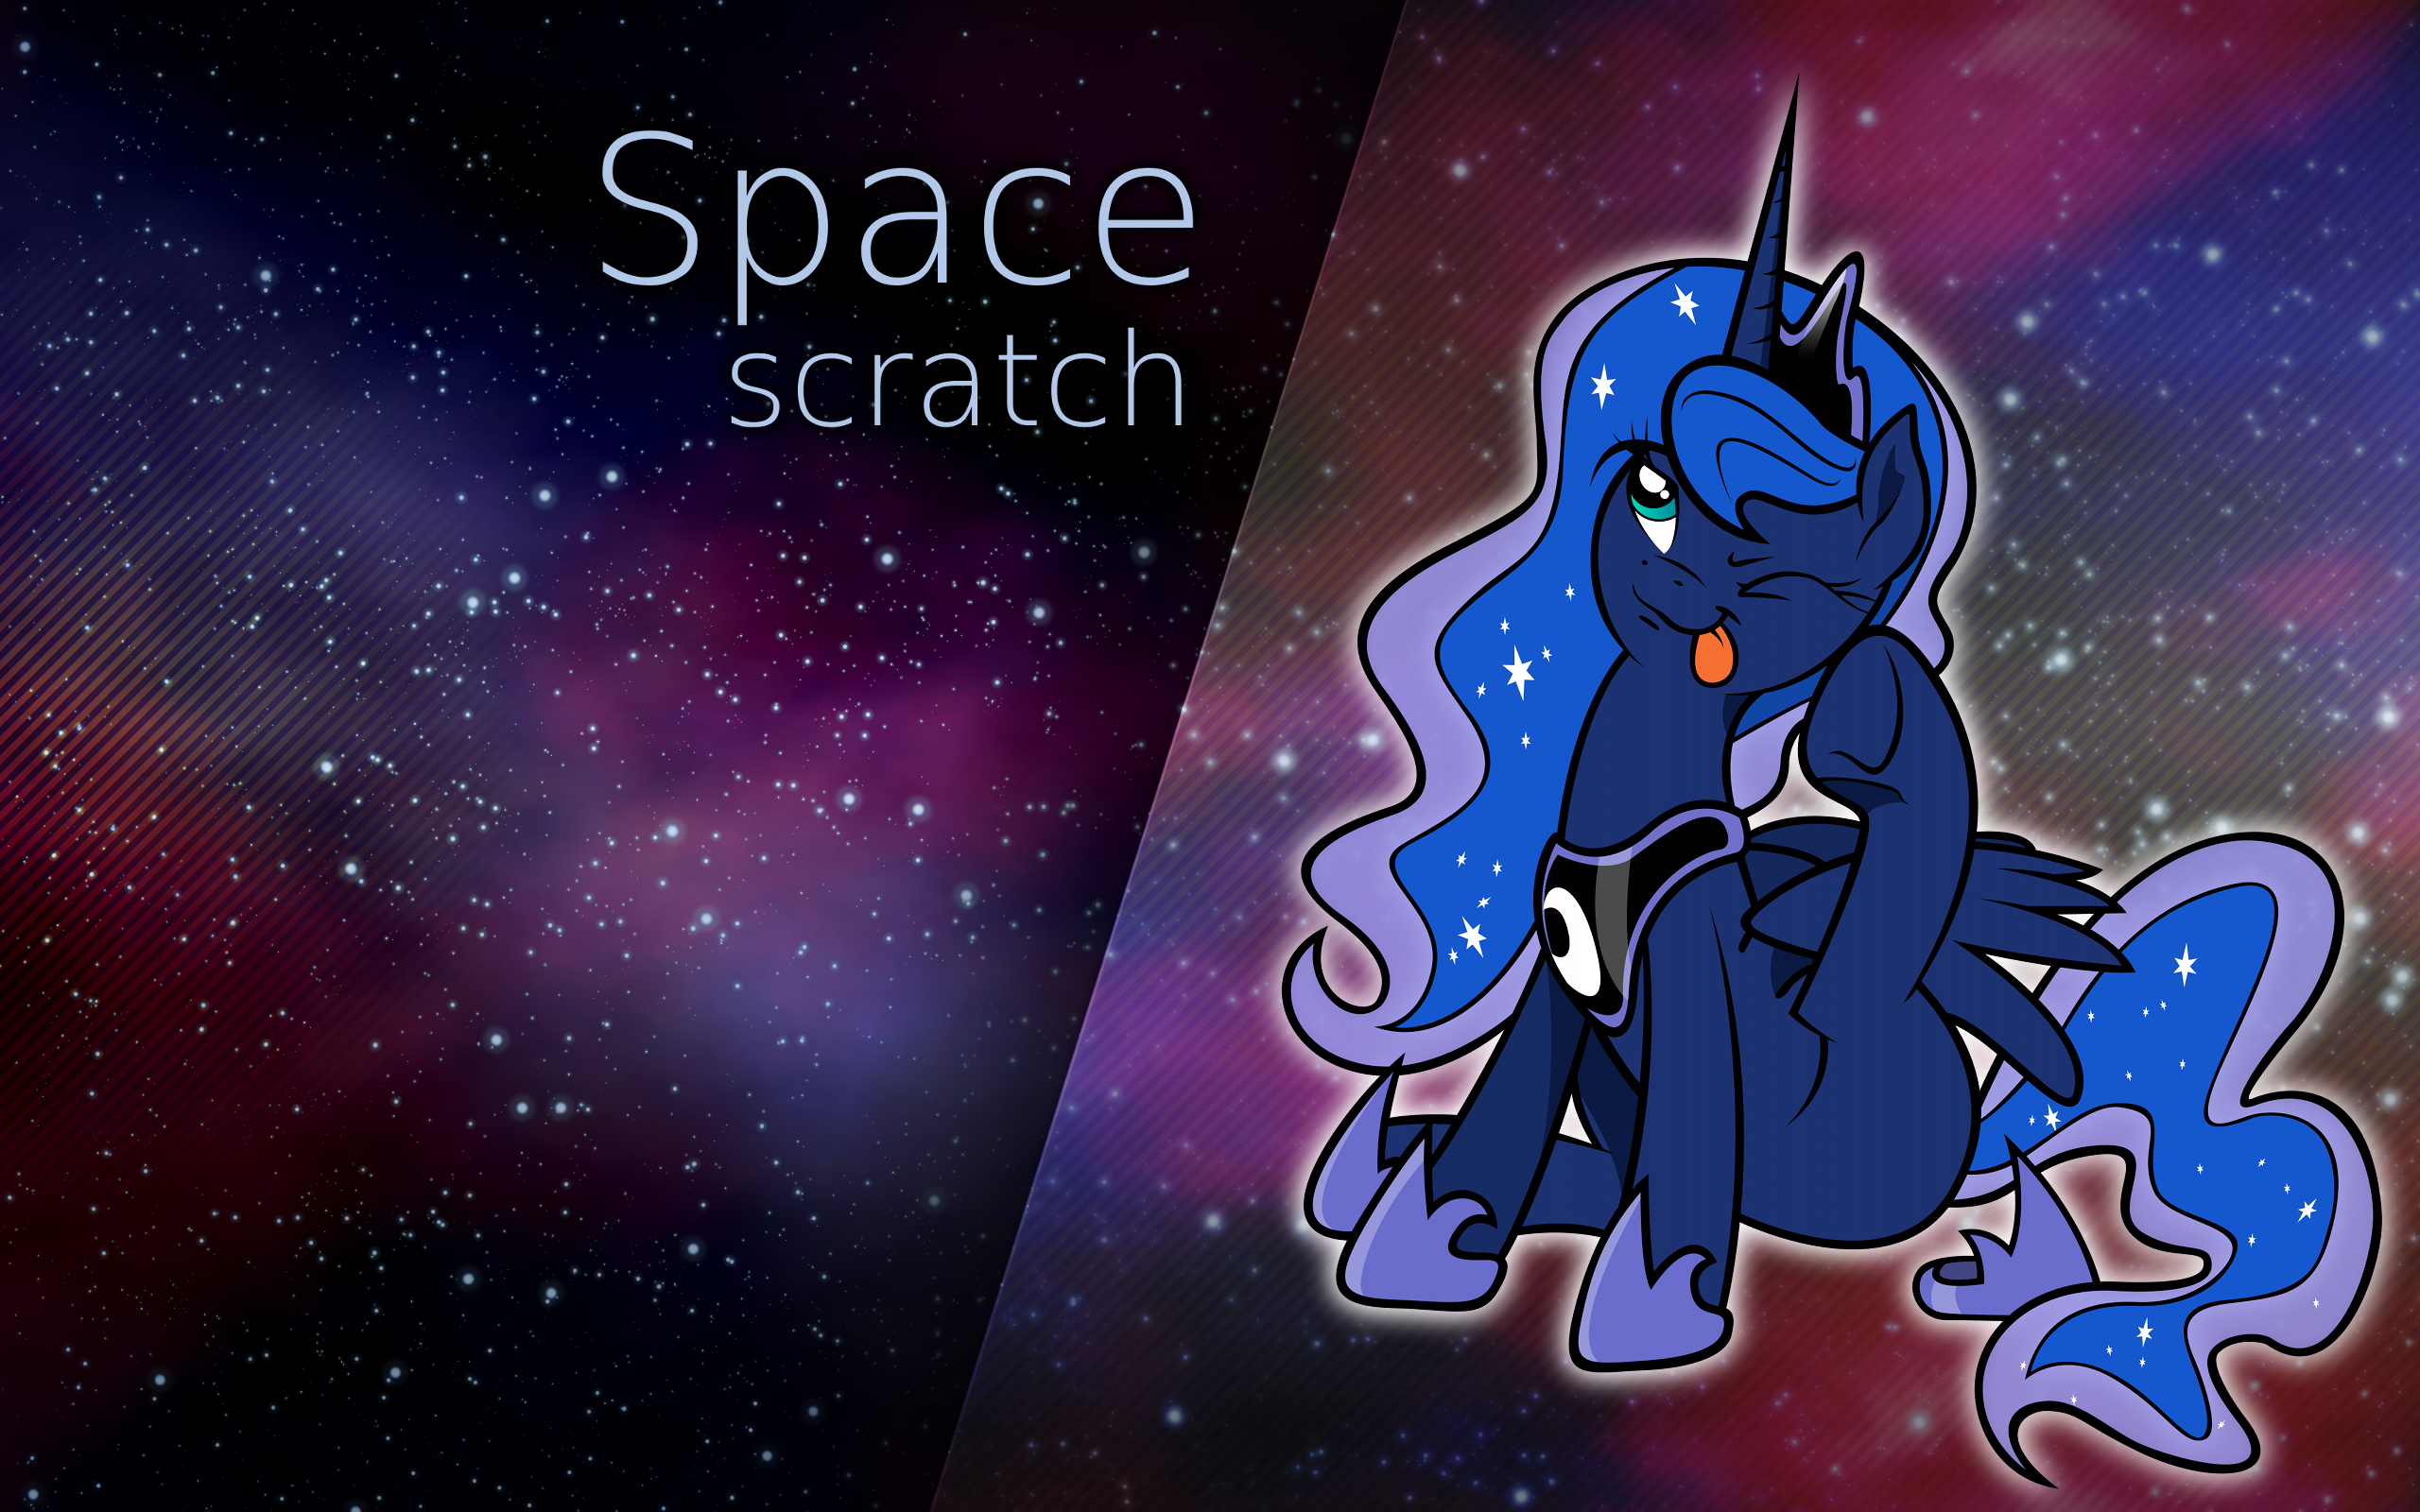 Space scratch by AlexPony, KP-ShadowSquirrel and SharkMachine